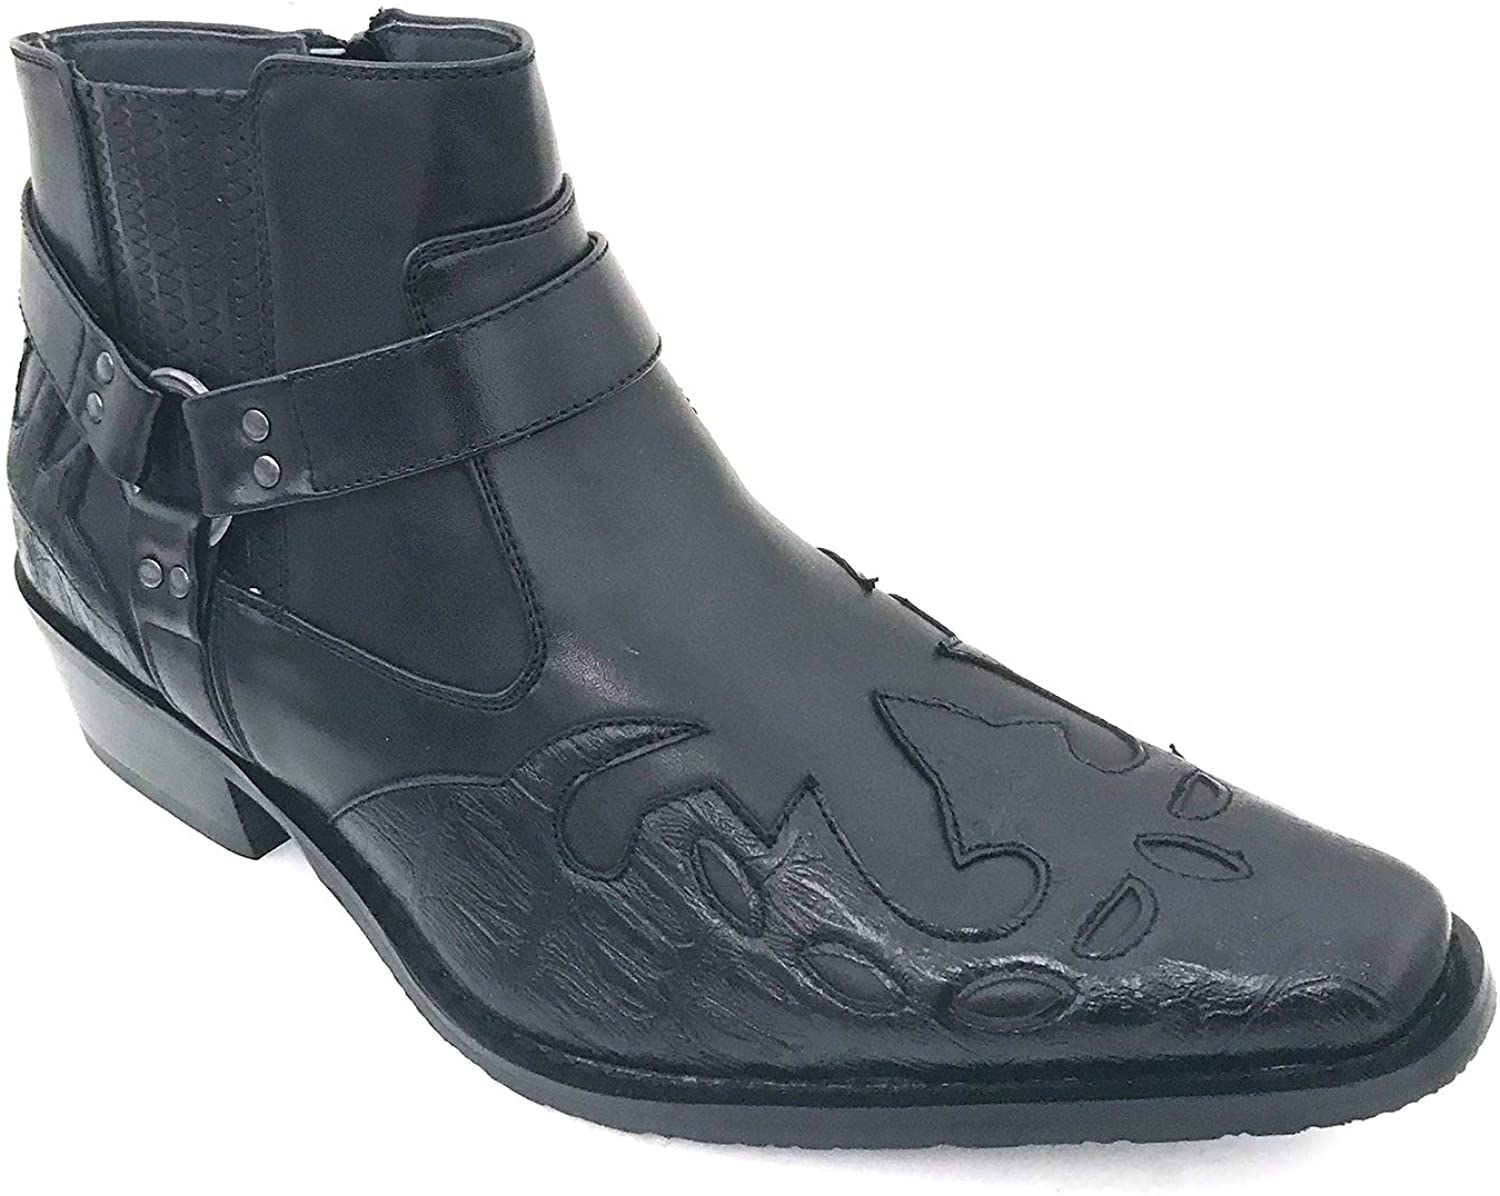 Men's Cowboy Boots Western Leather Lined Ankle Harness Strap Side Zipper Shoes - image 1 of 5